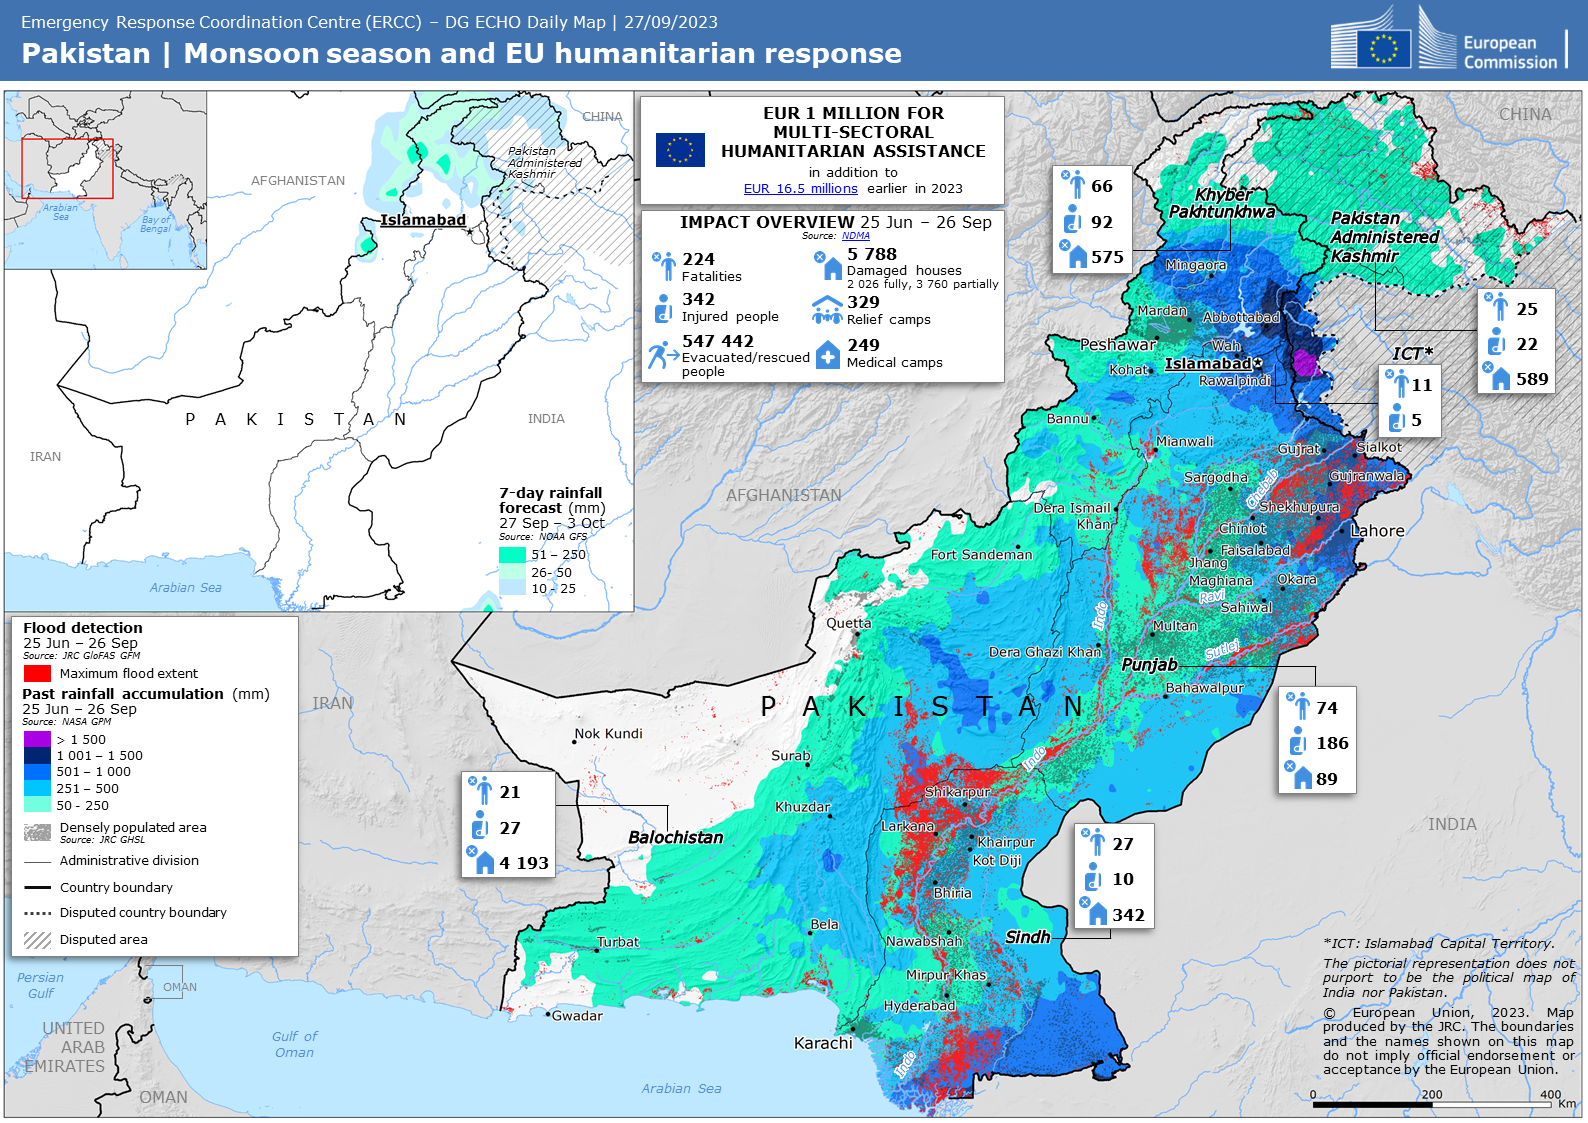 Map showing the monsoon season in Pakistan and EU humanitarian response for the period of September 2023